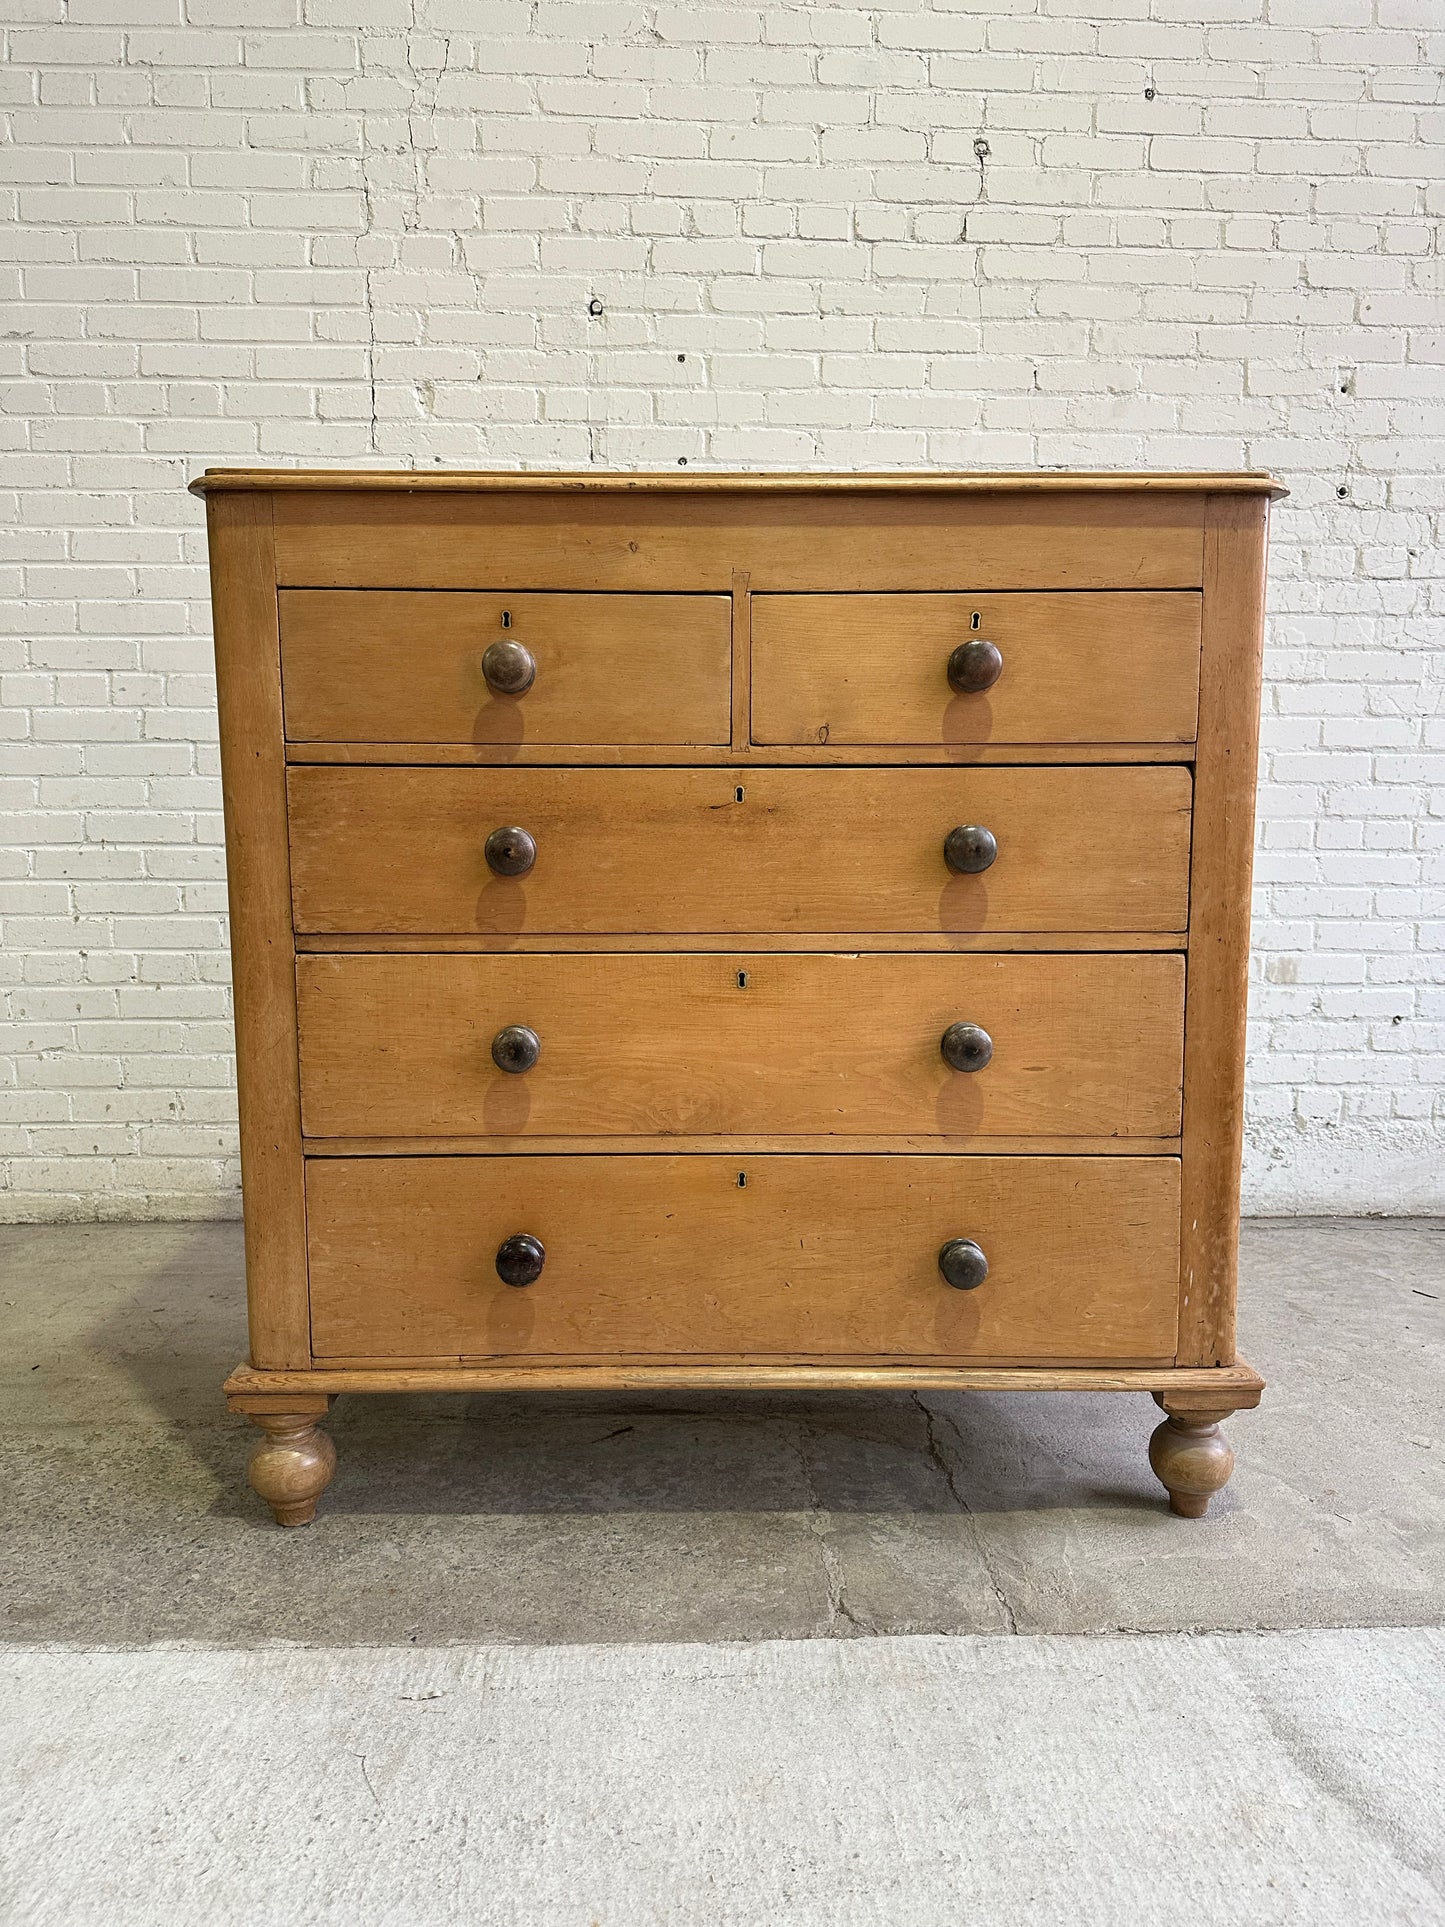 A Large Antique Pine Chest of Drawers with Mahogany Knobs c. 1860